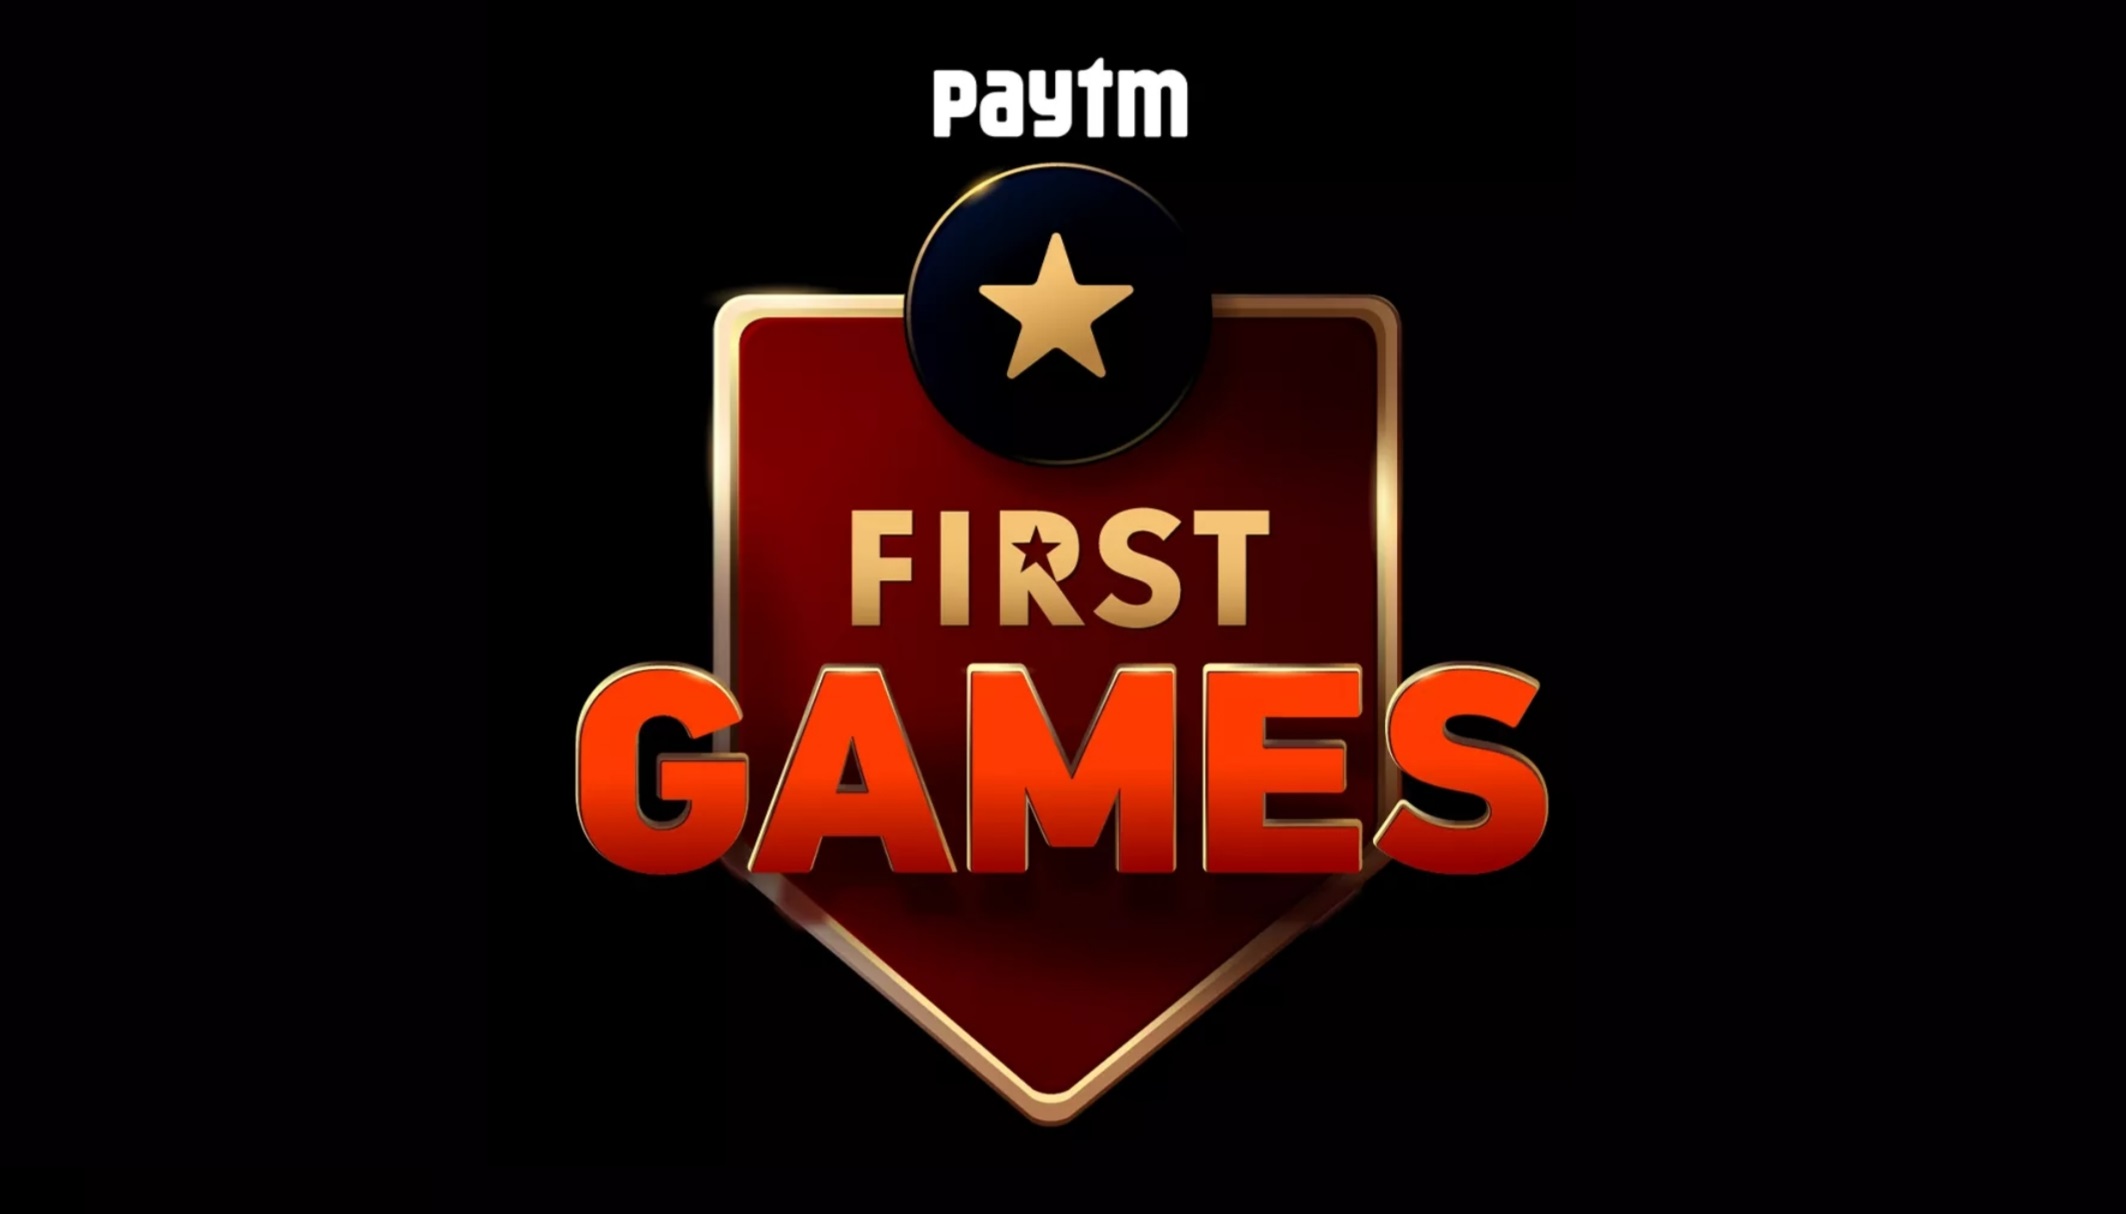 PAYTM FIRST GAMES